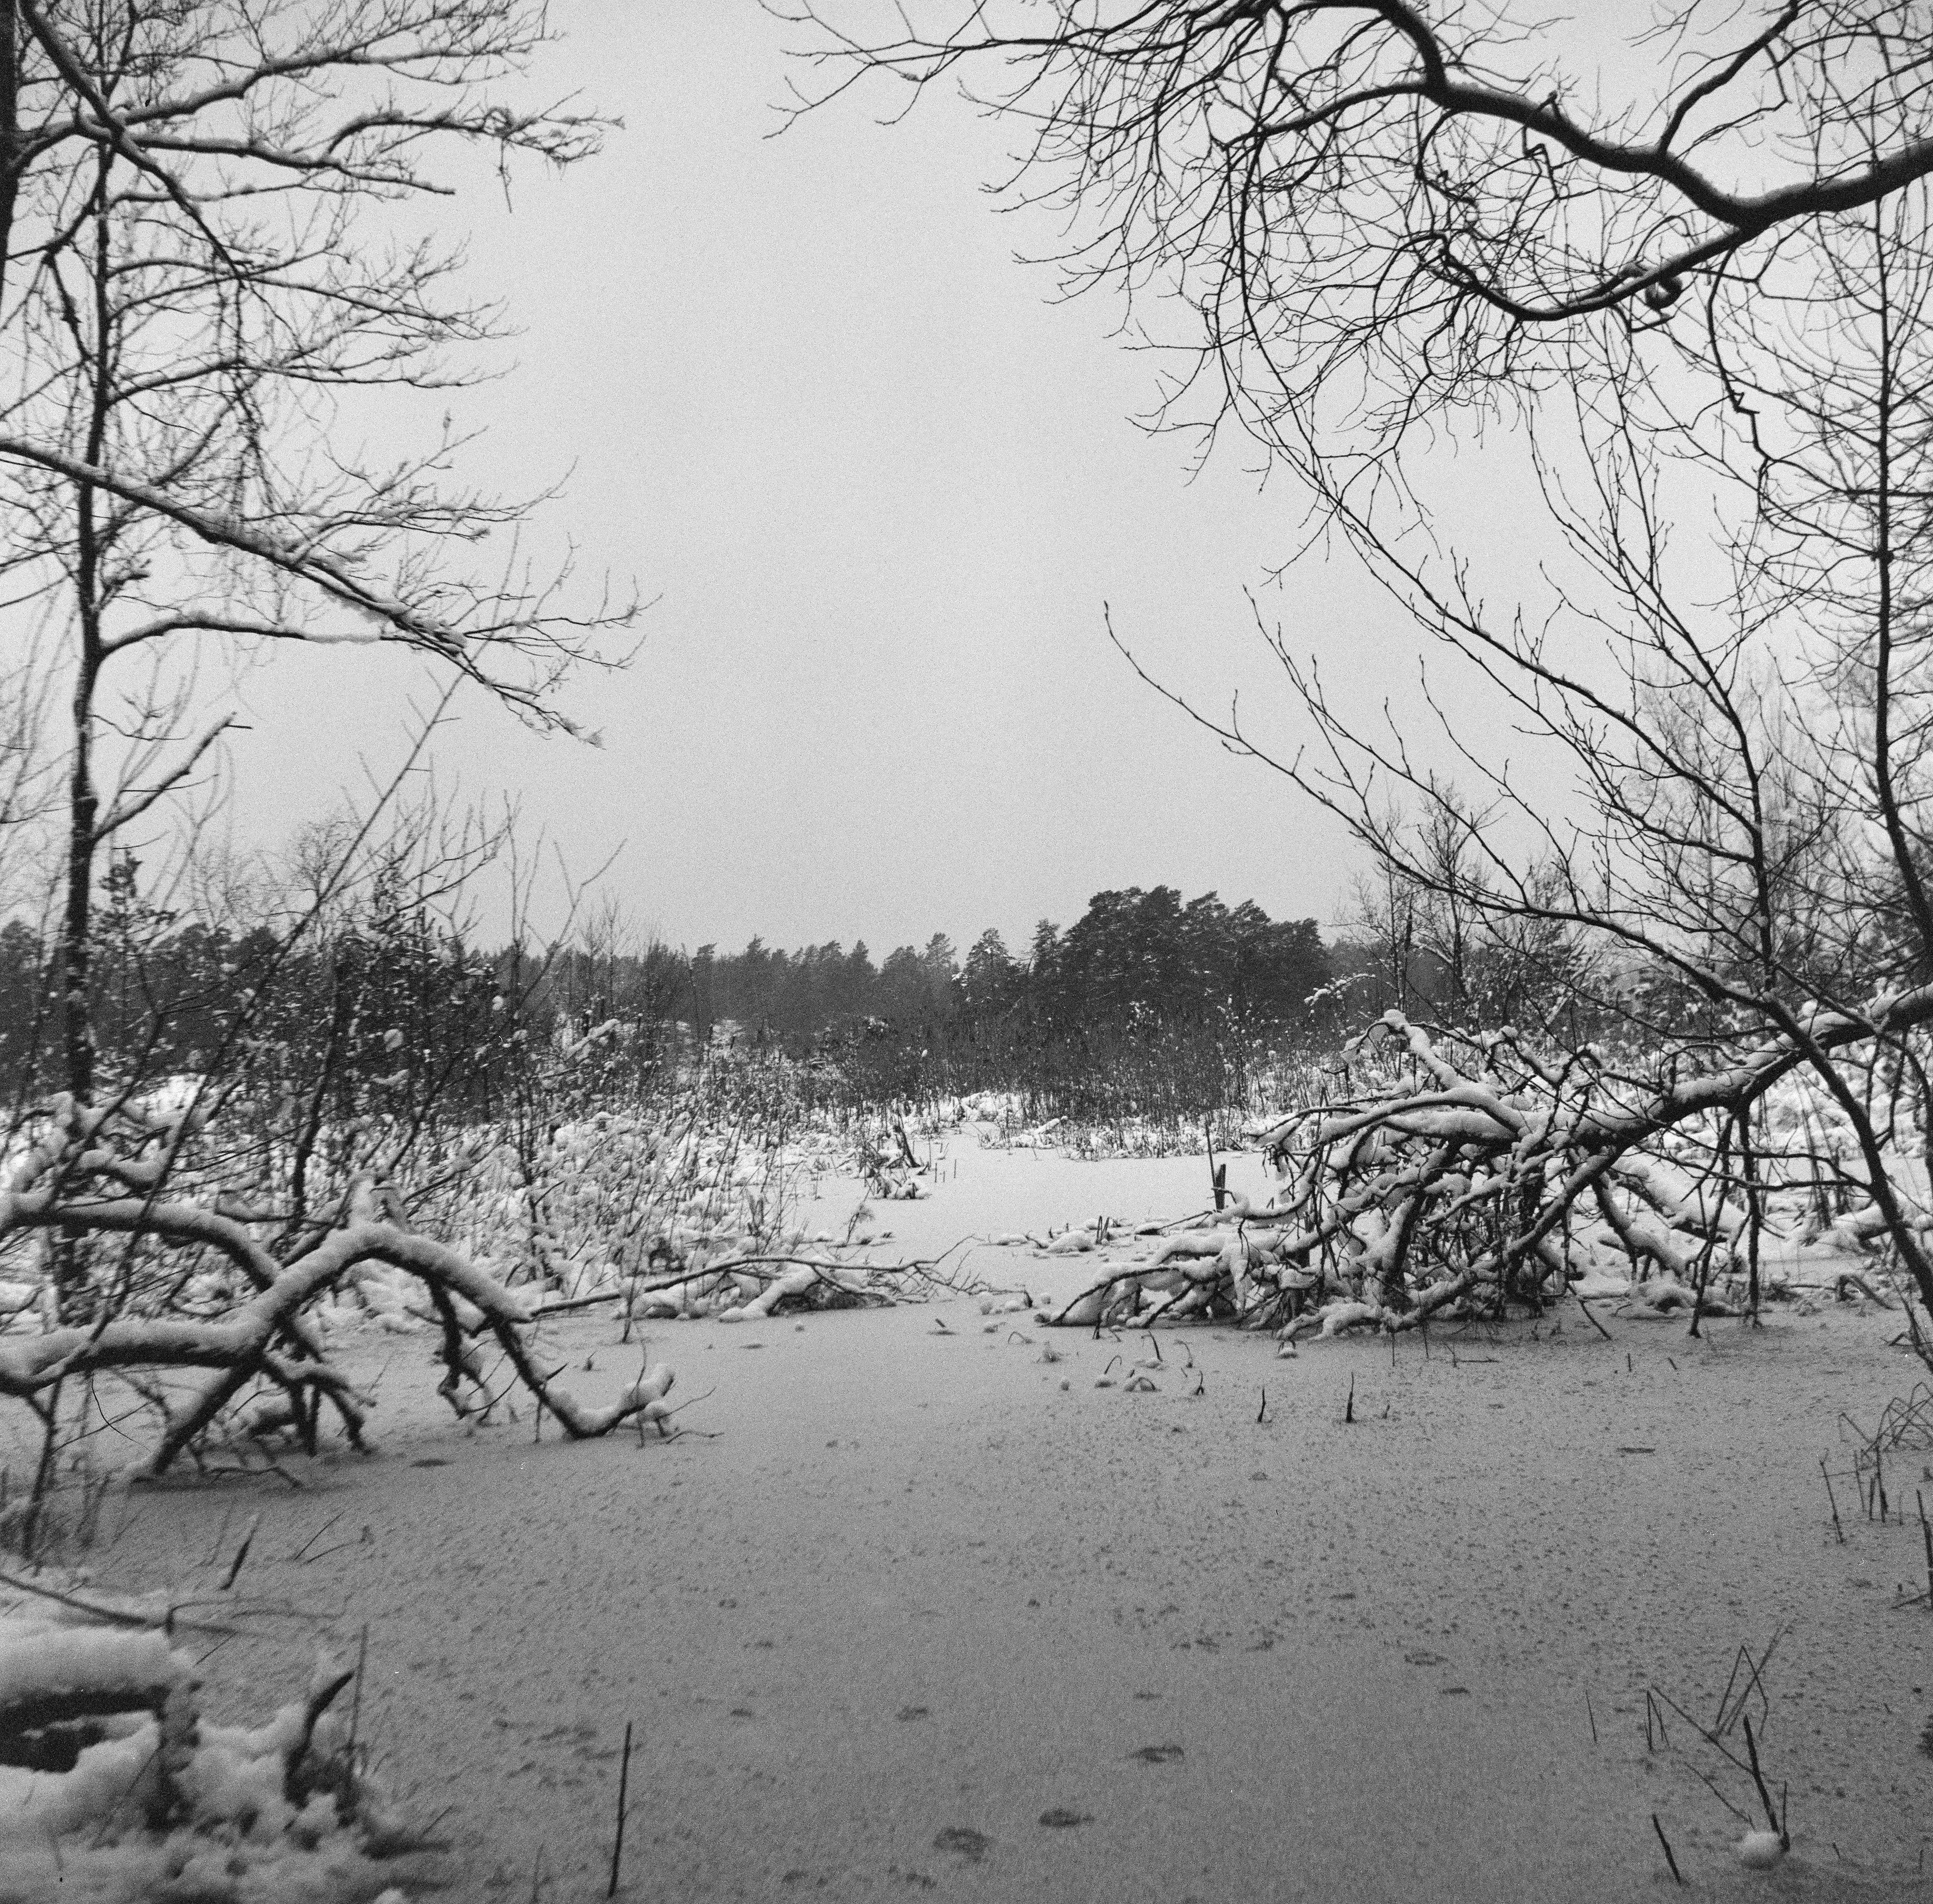 grayscale photo of bare trees on snow covered ground